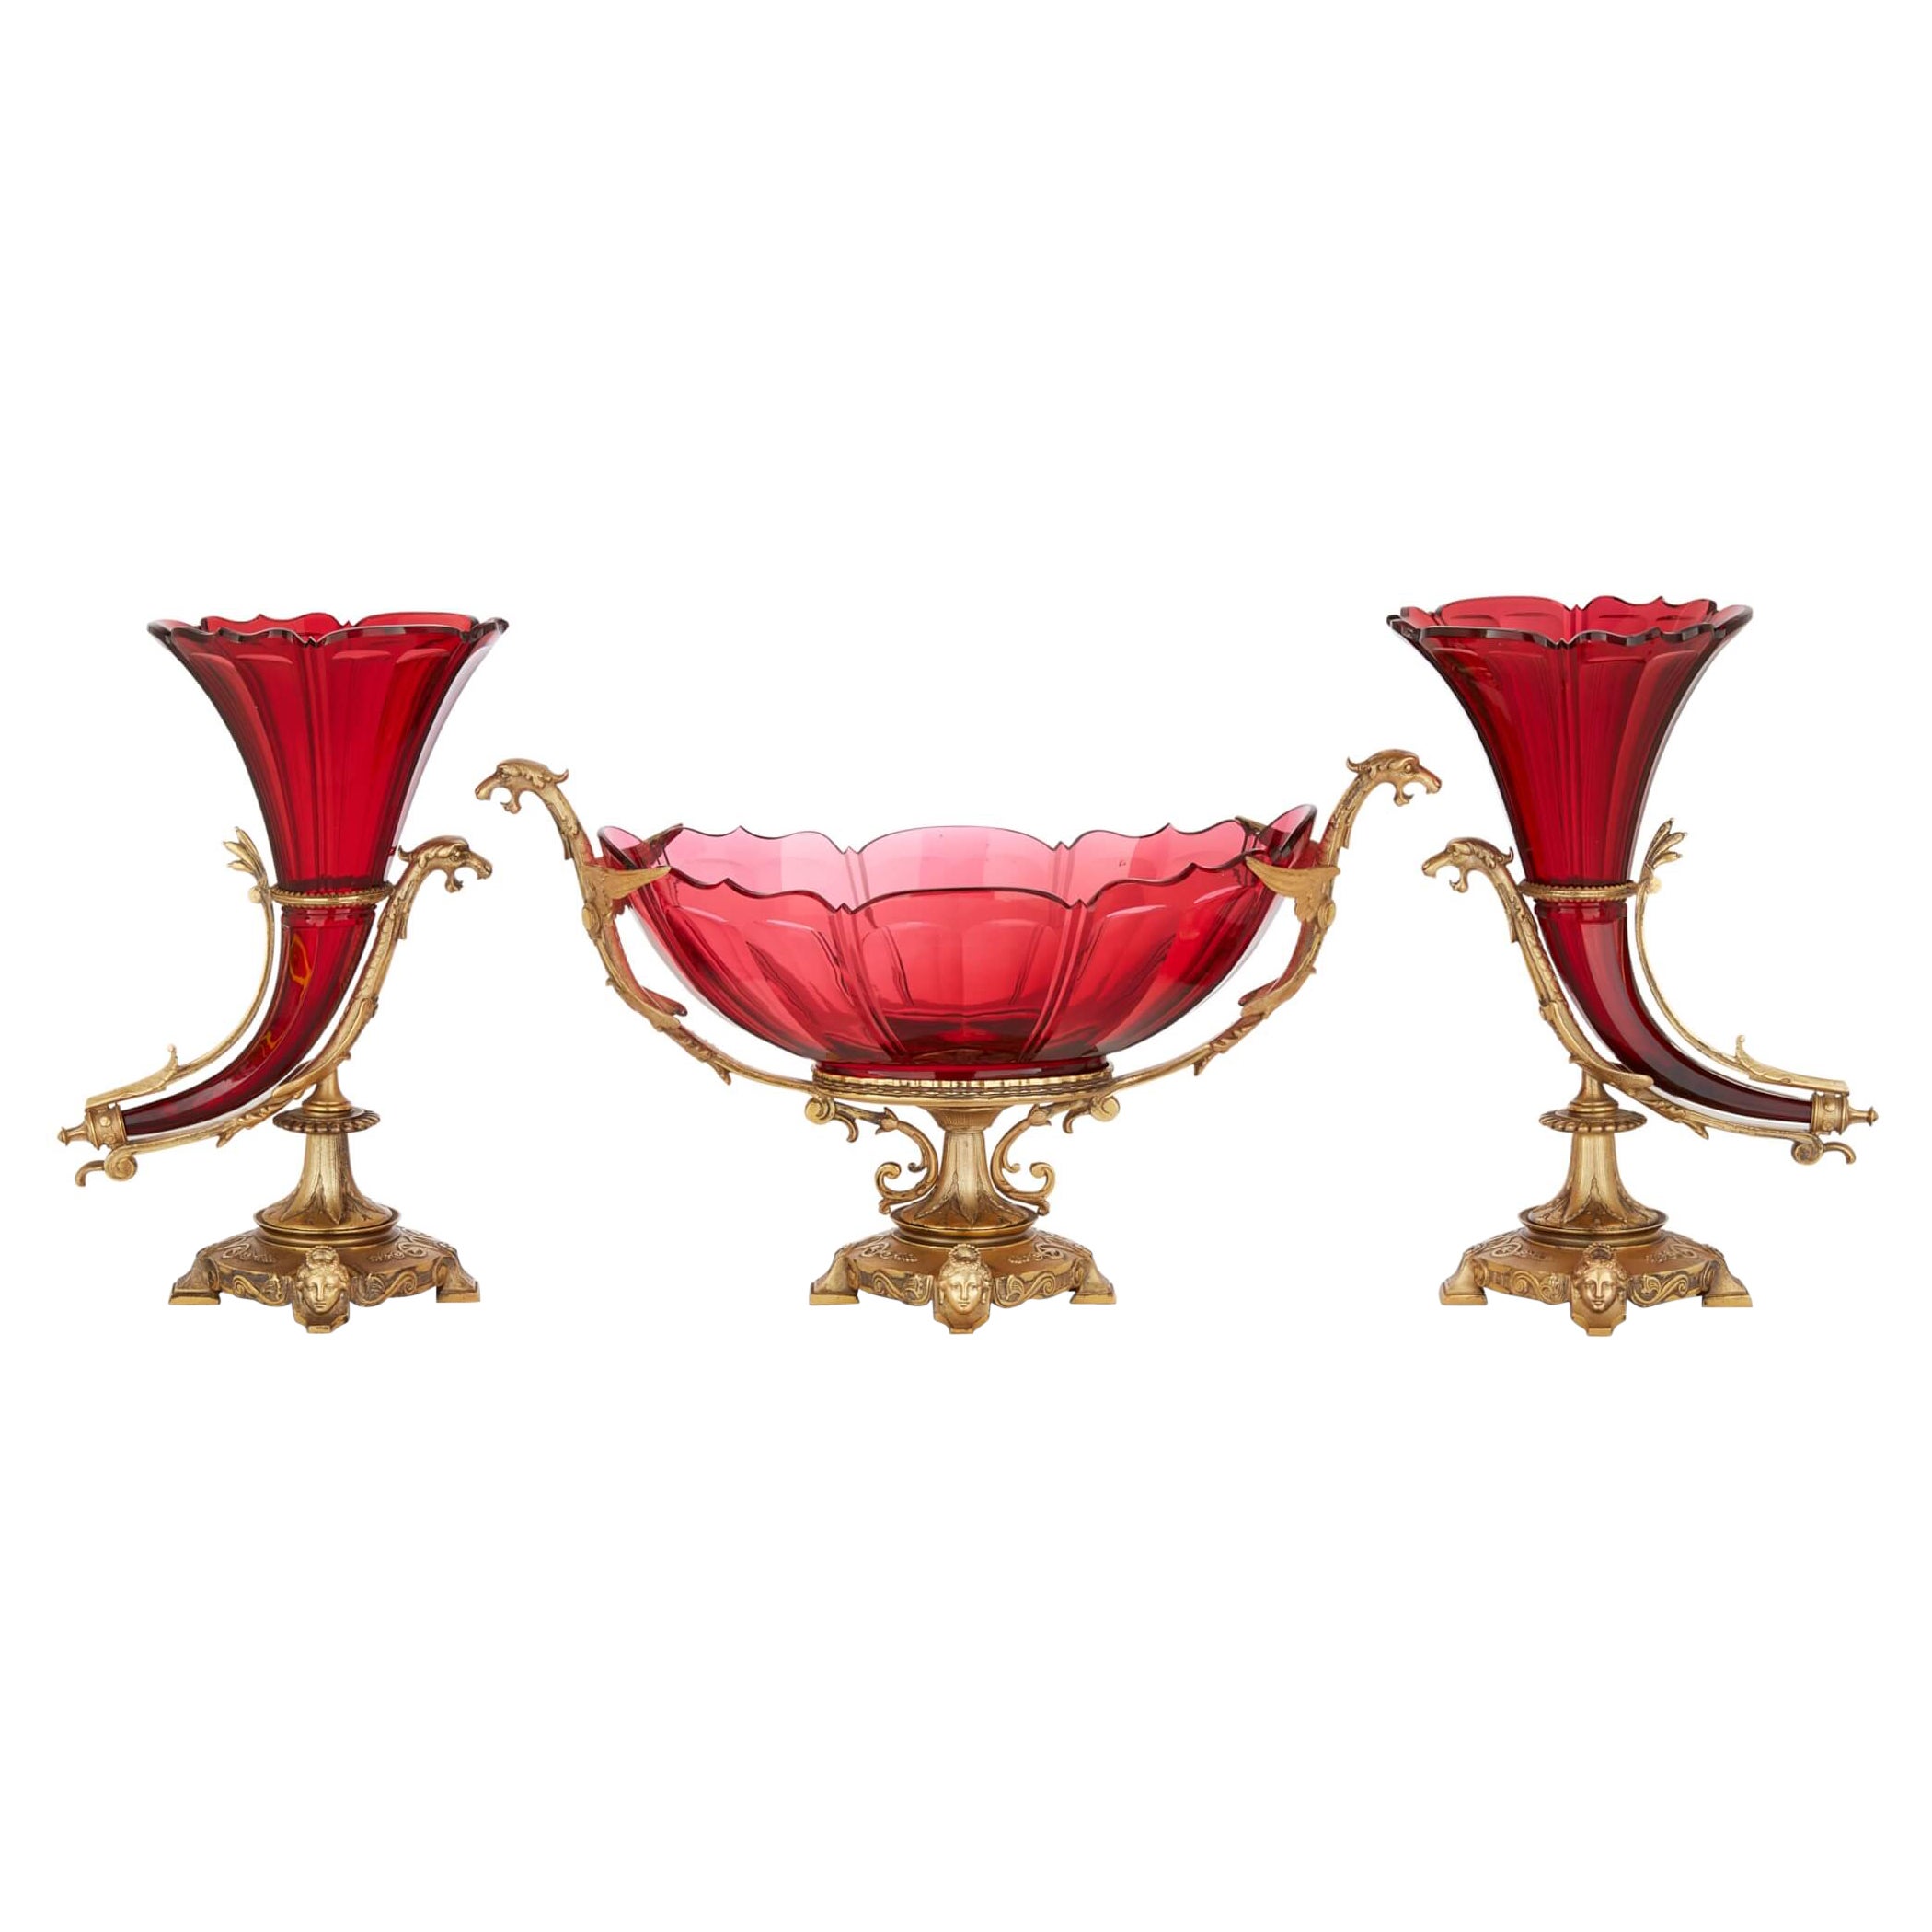 Large Antique Ormolu Mounted Red Glass Centrepiece Suite by Baccarat